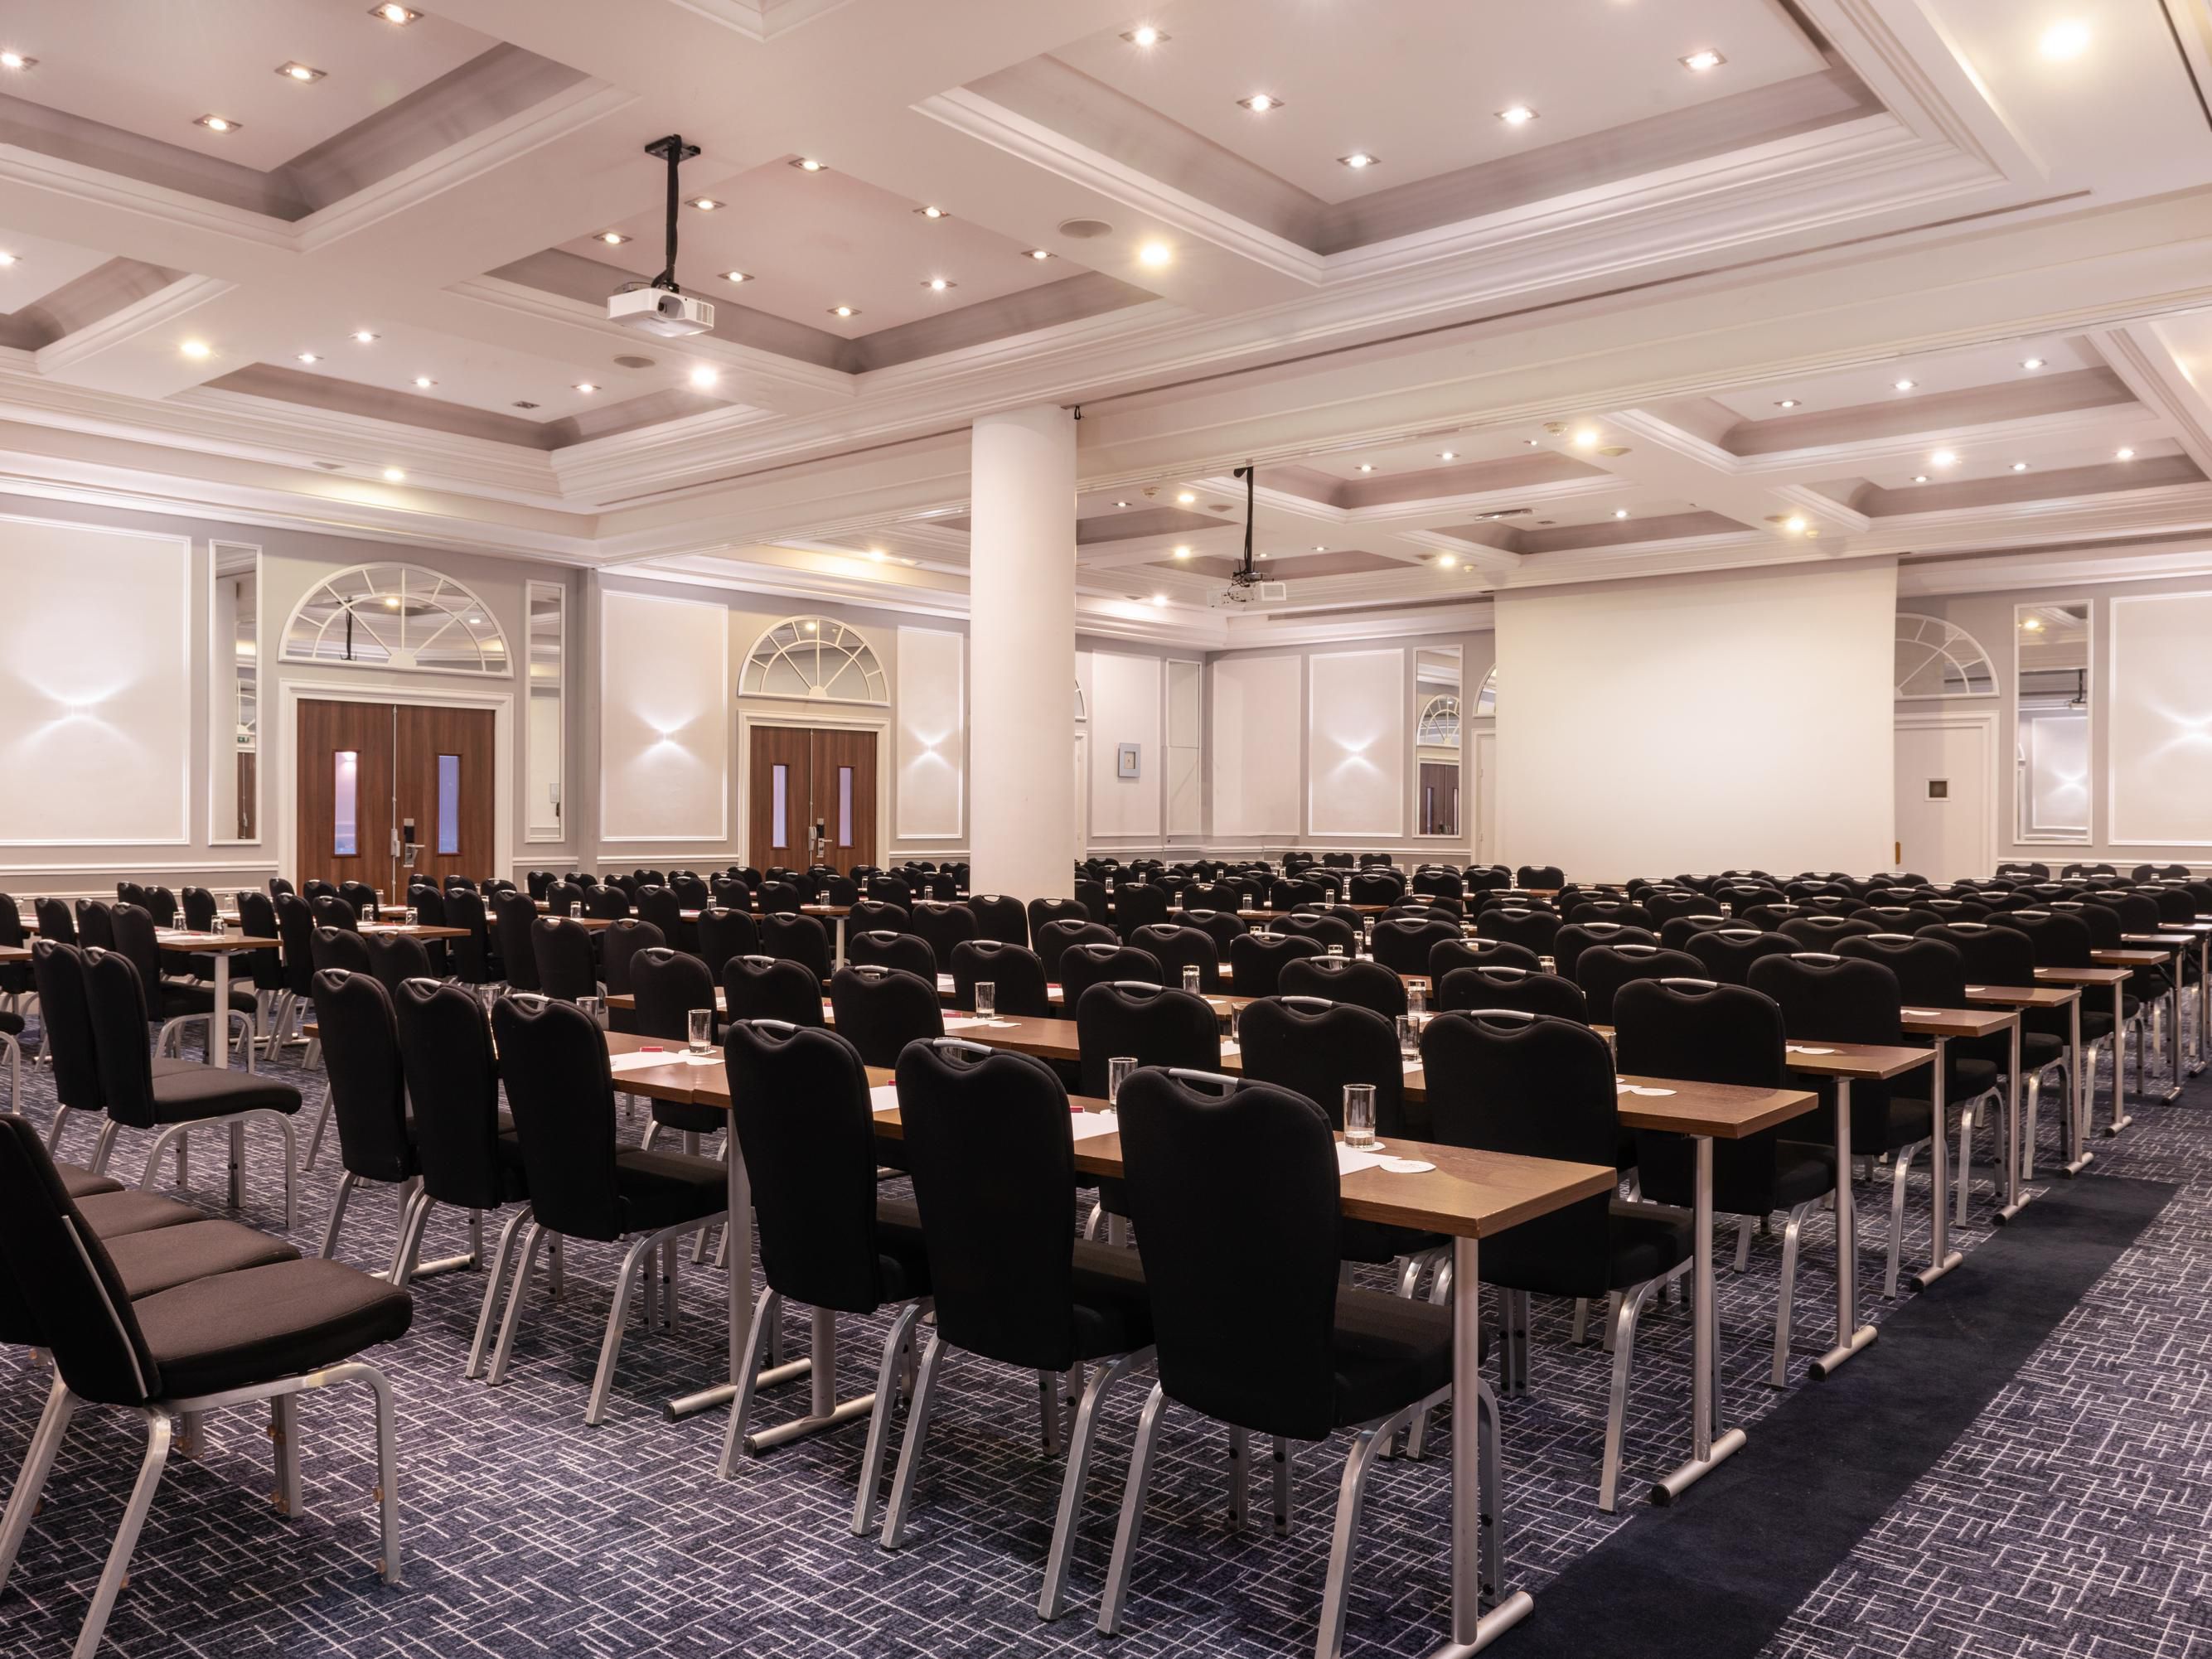 Crowne Plaza Paris - Republique has 11 meetings room, up to 226 sqm.
These rooms allow conference and events up to 250 participants.